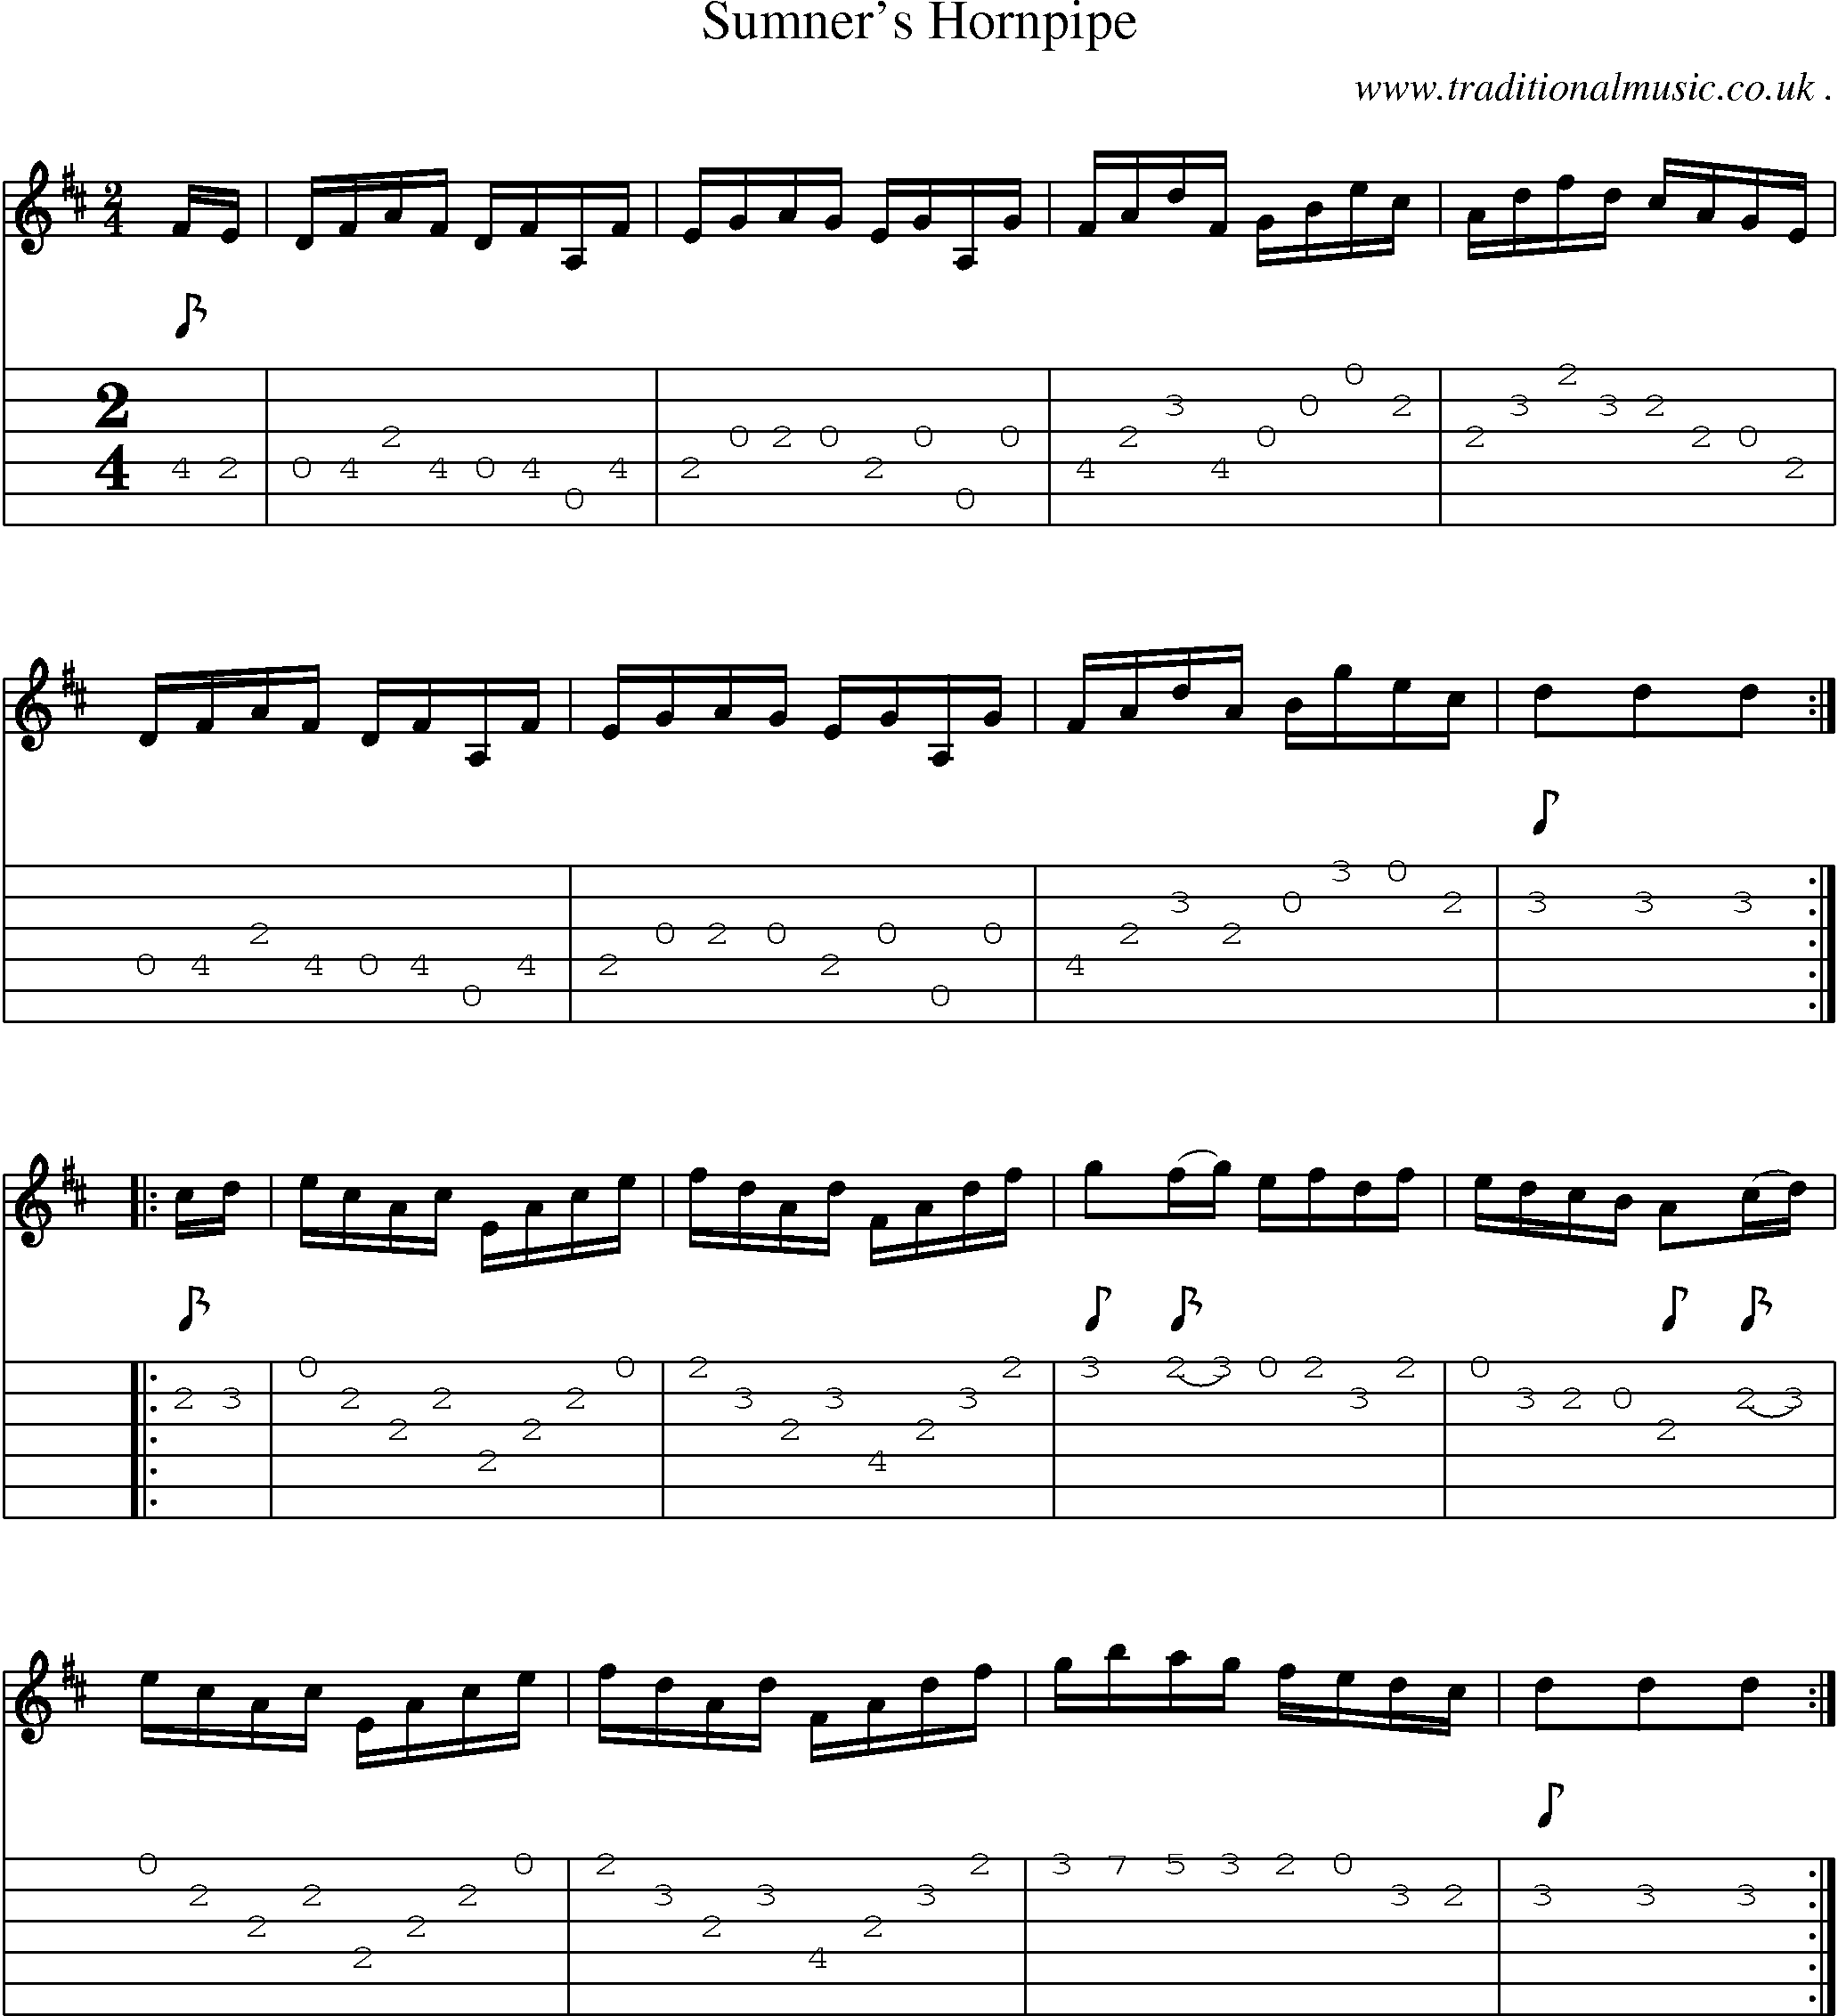 Sheet-Music and Guitar Tabs for Sumners Hornpipe